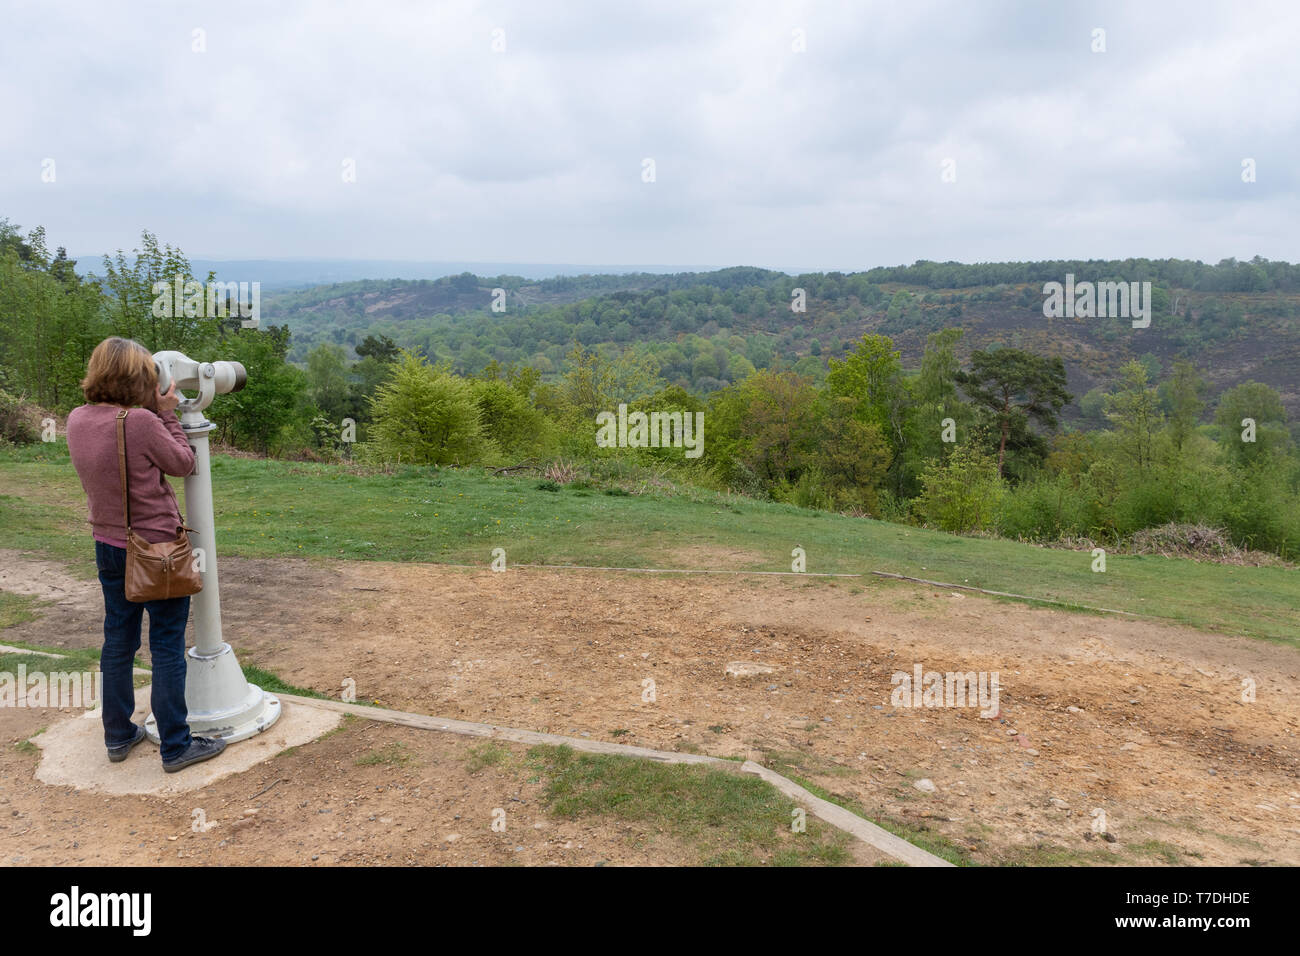 Woman looking at the countryside view at the Devil's Punchbowl, Surrey, UK, through a telescope. Landscape, scenery. Stock Photo